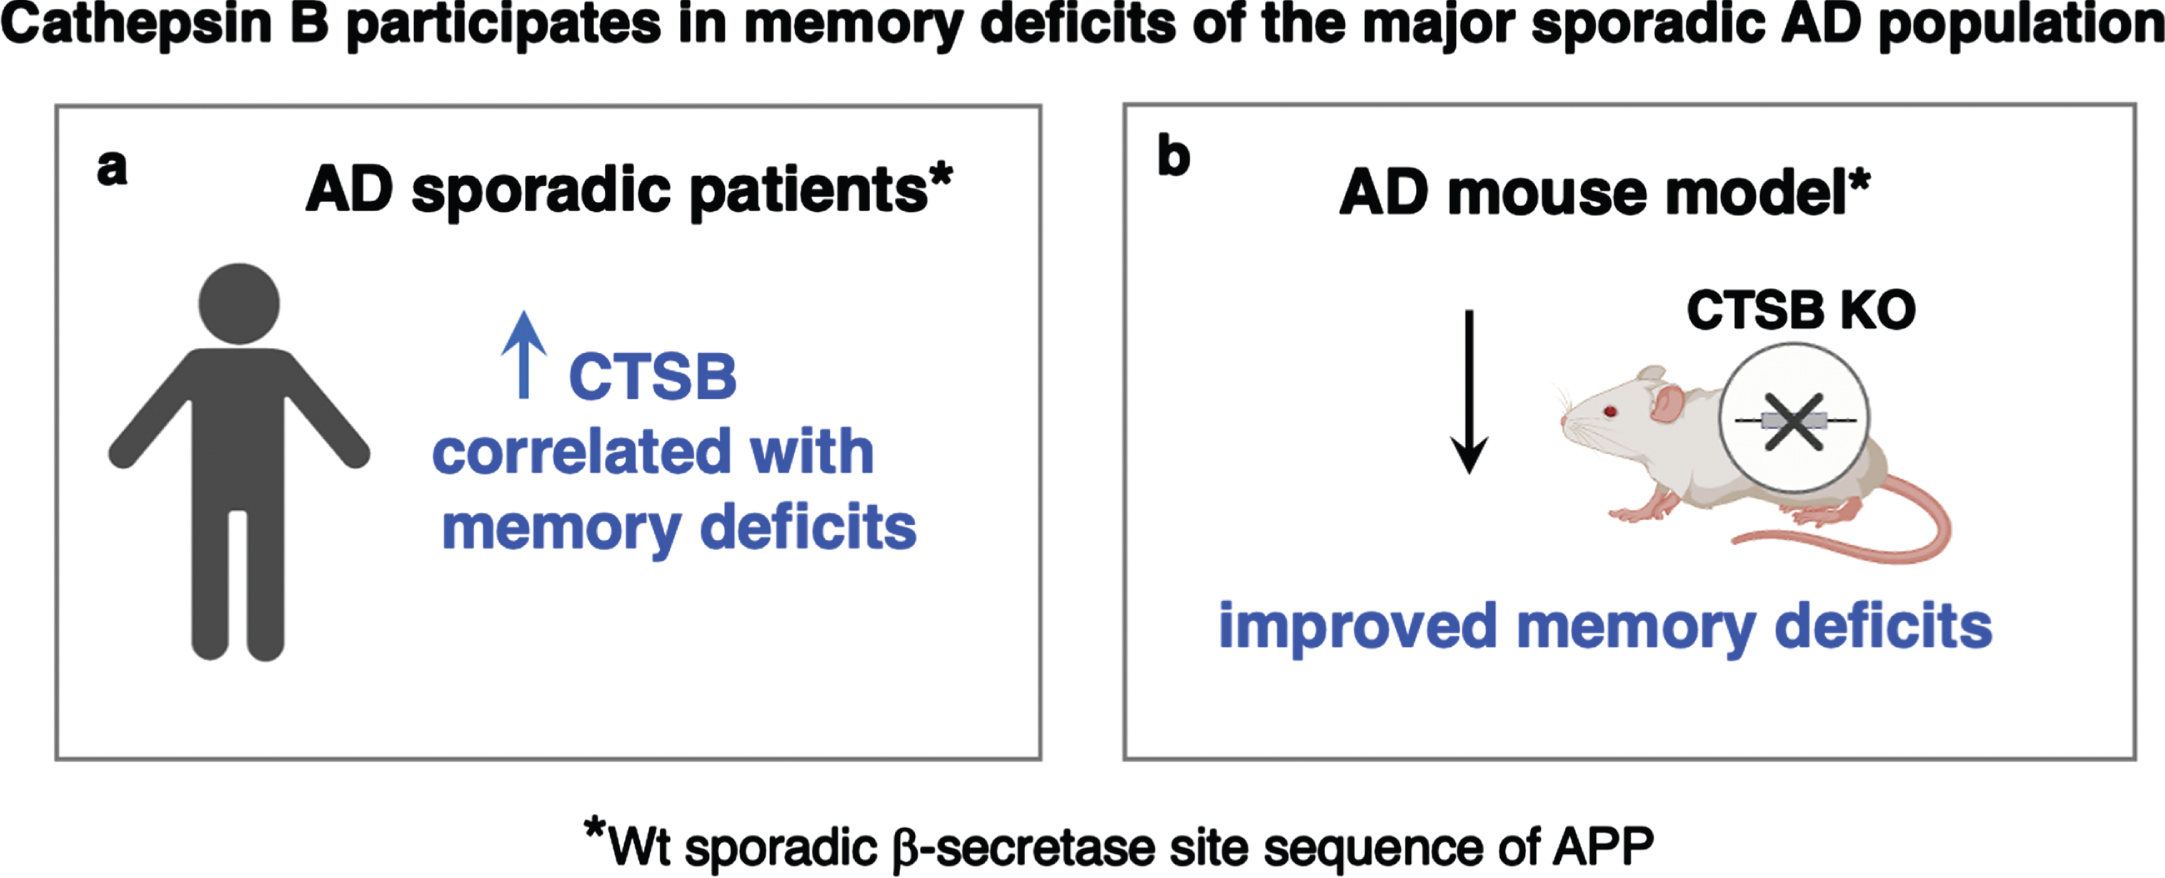 Cathepsin B participates in memory deficits of the major sporadic Alzheimer’s population. (a) CTSB elevation in Alzheimer’s disease (AD) patients correlates with cognitive deficits. Increased levels of CTSB were observed in sporadic AD [1, 2, 4], the major population of AD. Significantly, elevated CTSB was found to be significantly correlated with cognitive decline in AD patients [1]. (b) CTSB gene knockout in animal models of AD results in improved memory deficits. In the AD mouse model expressing hAβPP-695, CTSB gene knockout resulted in substantial improvement in memory deficits [7]. Furthermore, knockout of CTBS in the periodontitis model of AD resulted in improved memory deficits in middle-aged mice [8].